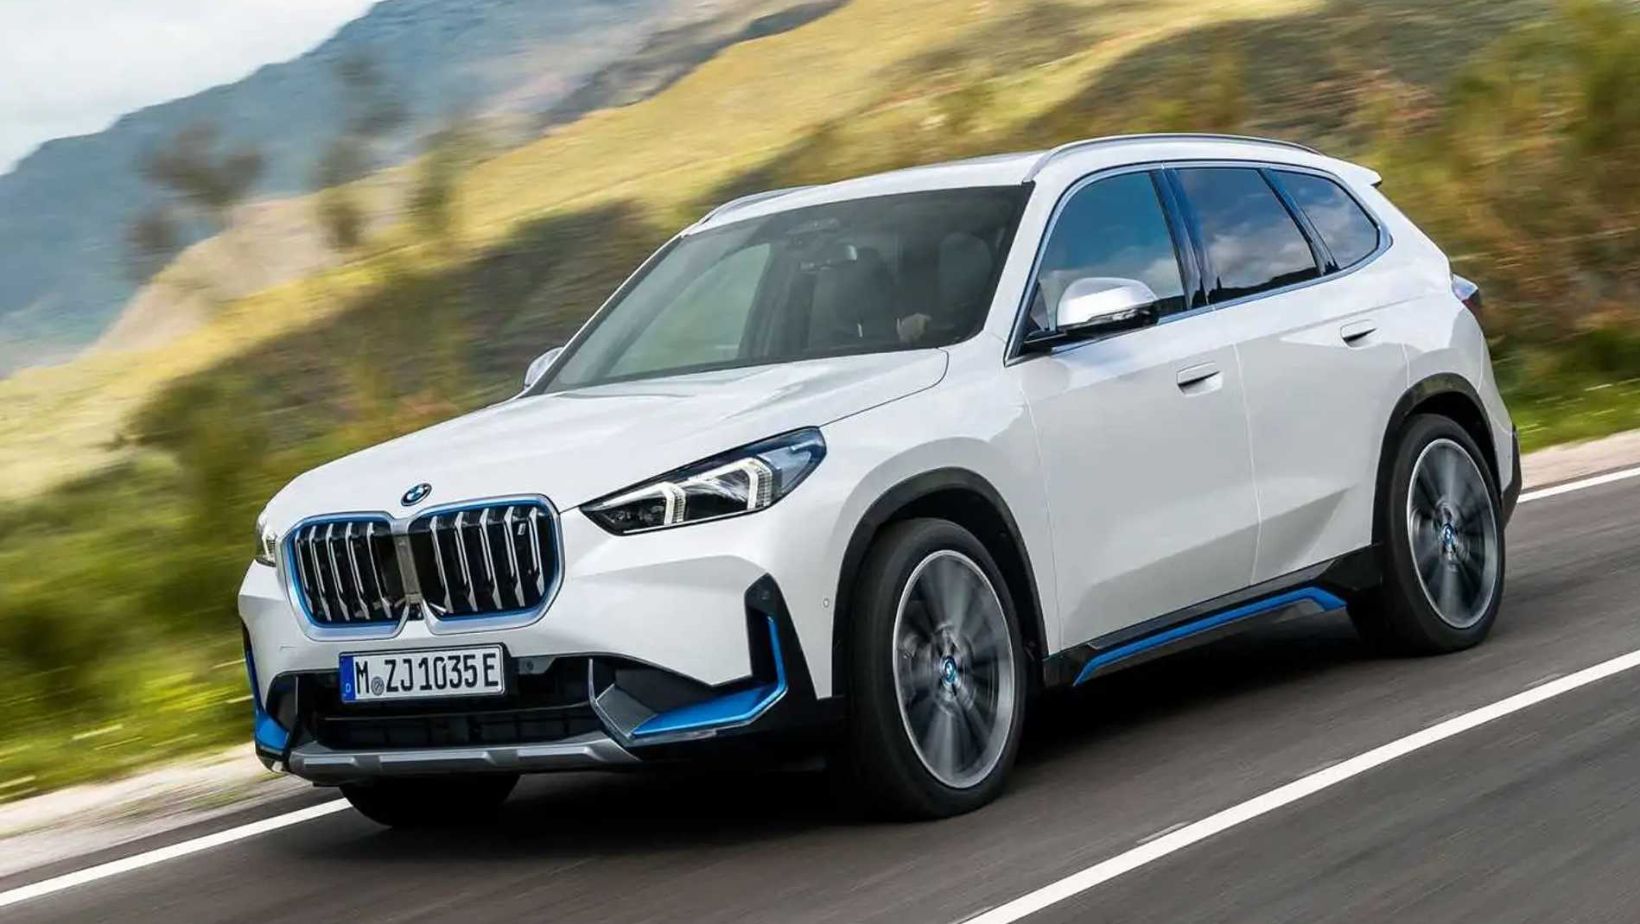 Heading Towards the Future: An Insight into the Upcoming BMW iX1 Electric Vehicle